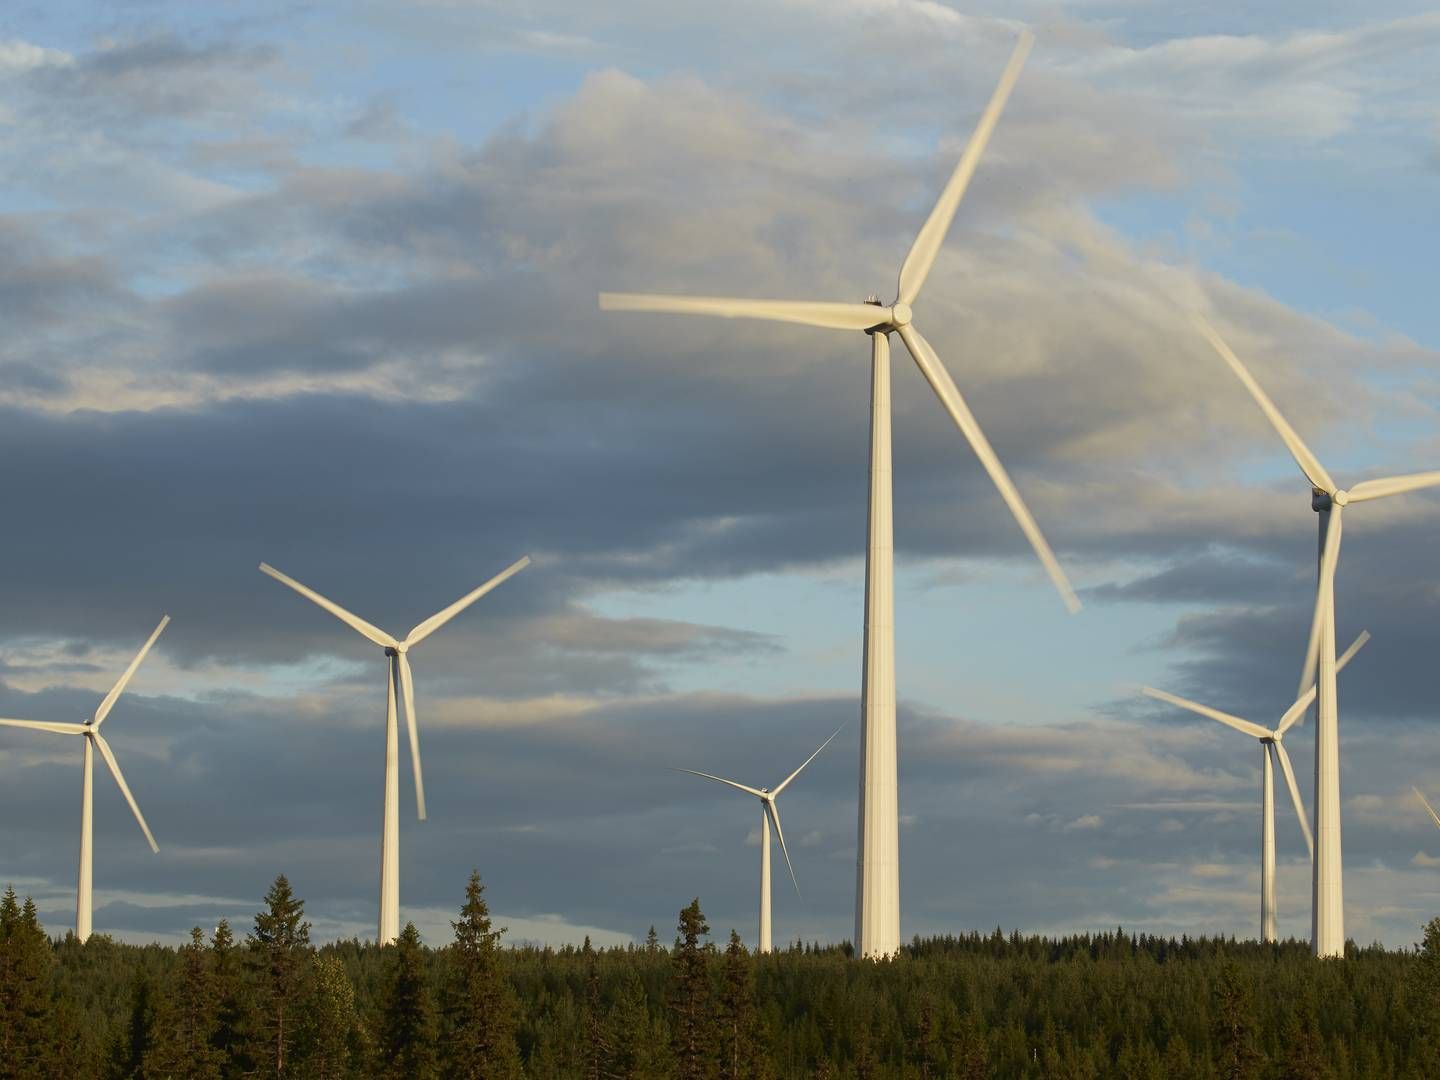 Statkraft's first-ever wind farm, Stammåsen at 60 MW form 2013, is one of the facilities whose value has been decimated from the price collapse of the Sweden's renewable energy certificates. | Photo: Statkraft